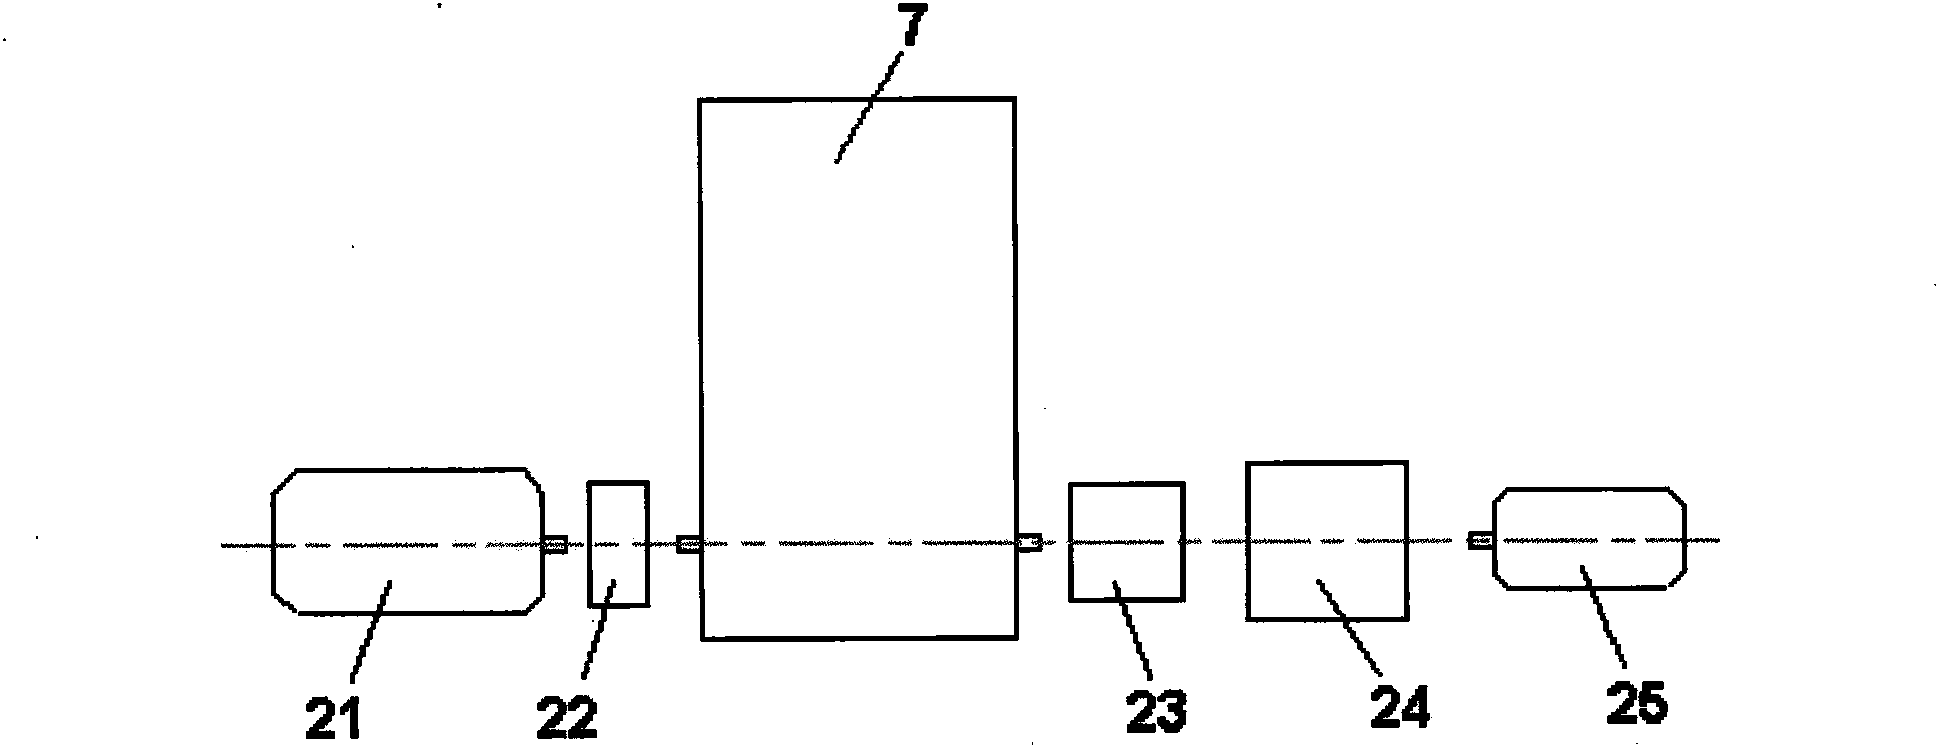 Transmission system of rotary-type heat exchanger